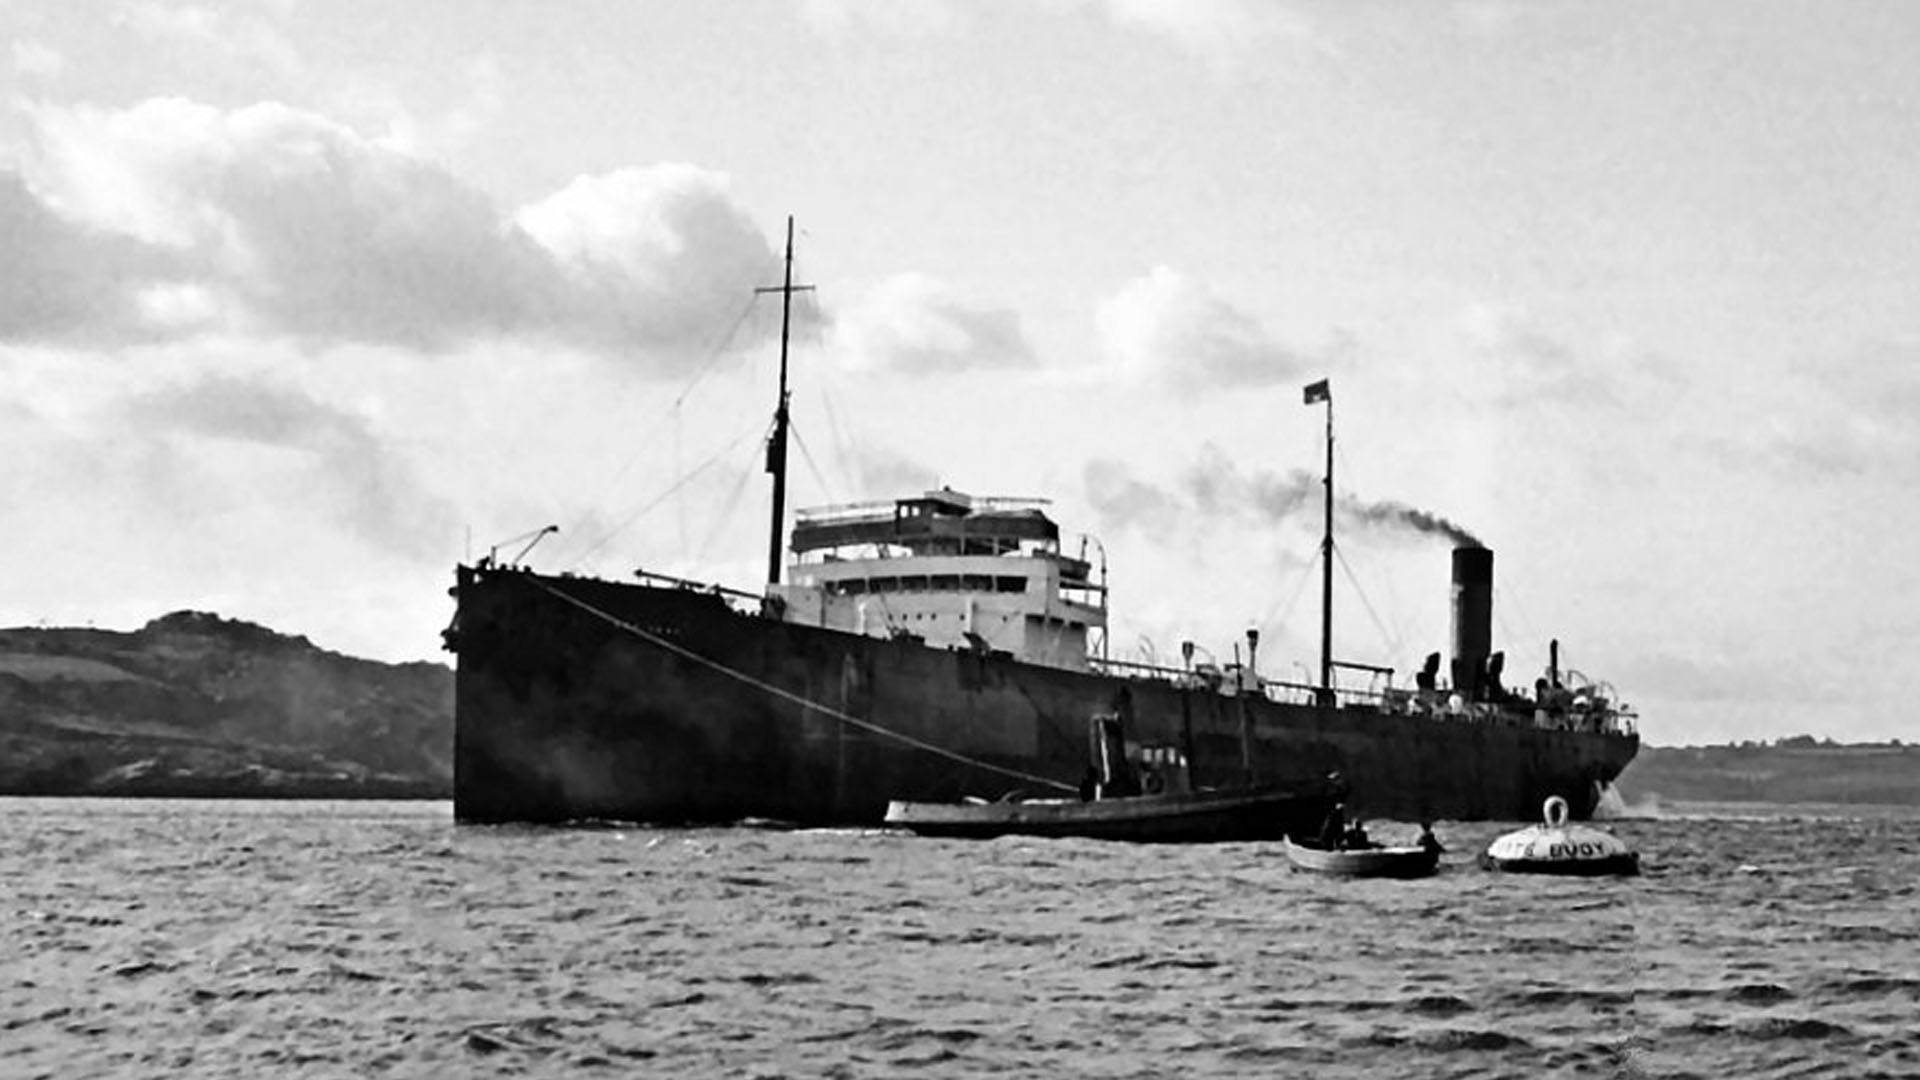 British merchant tanker S.S. Cadillac went down on 1st March 1941 after coming under attack in the Atlantic ocean from U-552.